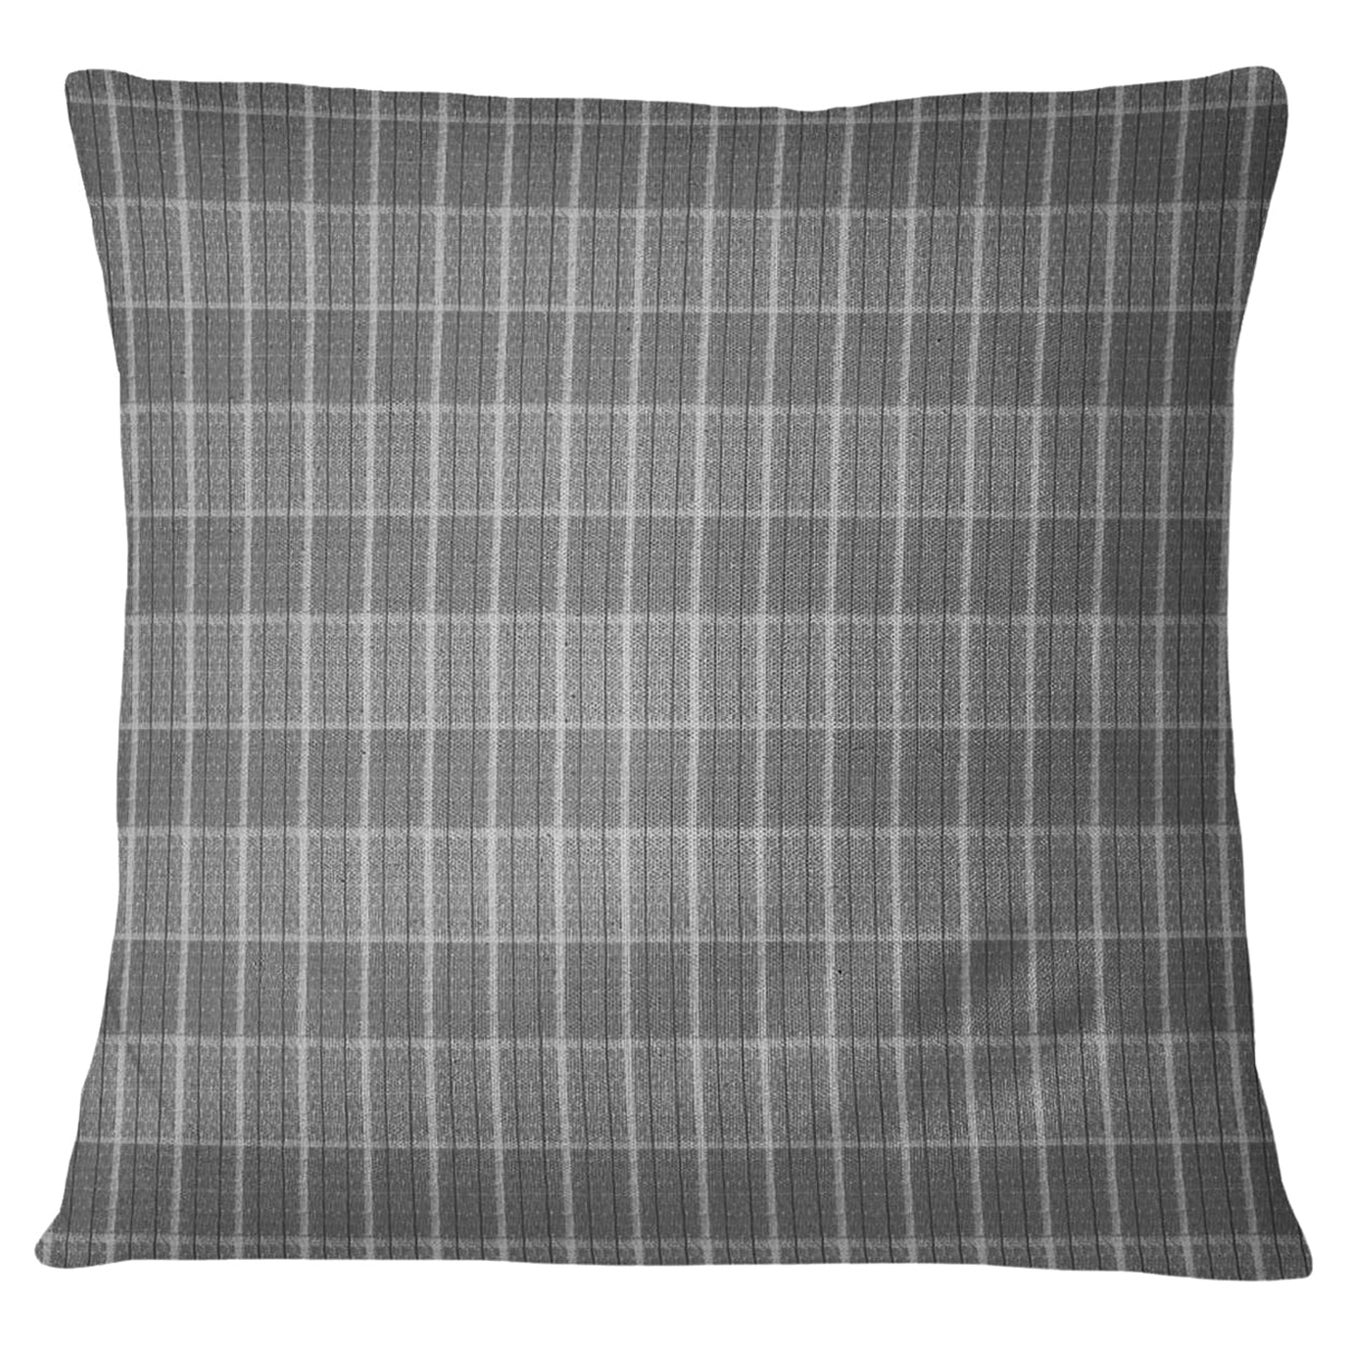 Checkmate Polyester Throw Pillows Set of 2 in Noir